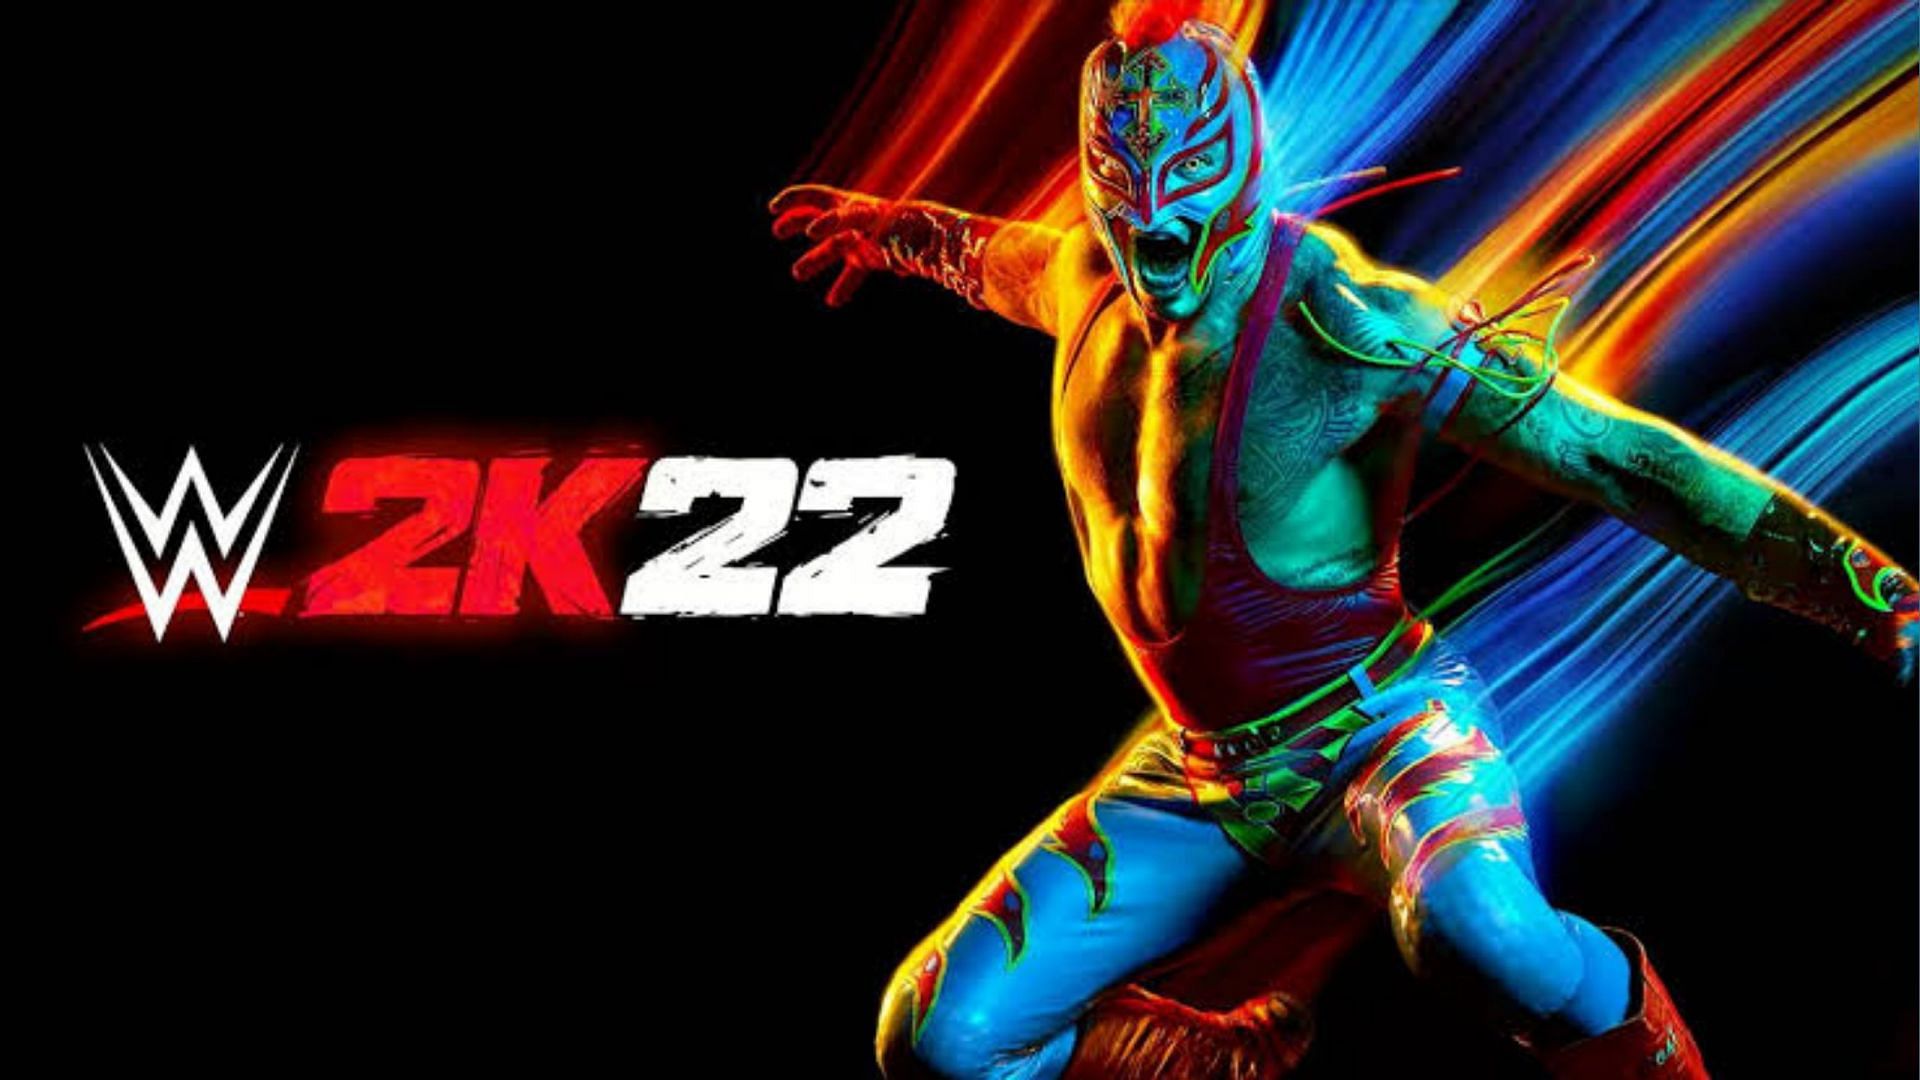 Check out the all-new benefits of the WWE 2K22 pre-order.